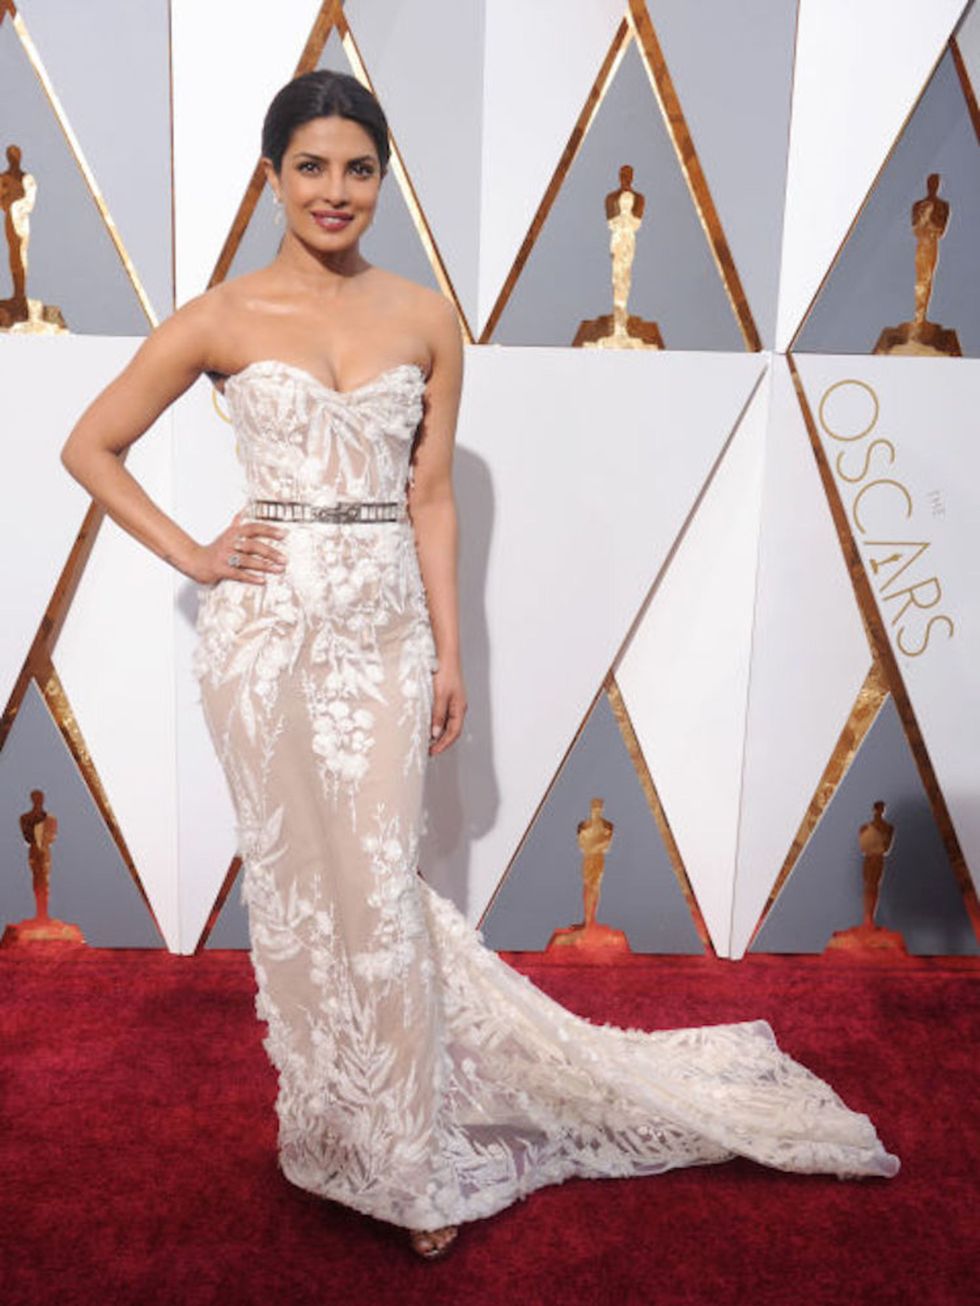 At the Oscars on Feb. 28 in Hollywood, Priyanka wore a Zuhair Murad gown that she chose for its comfort and femininity.